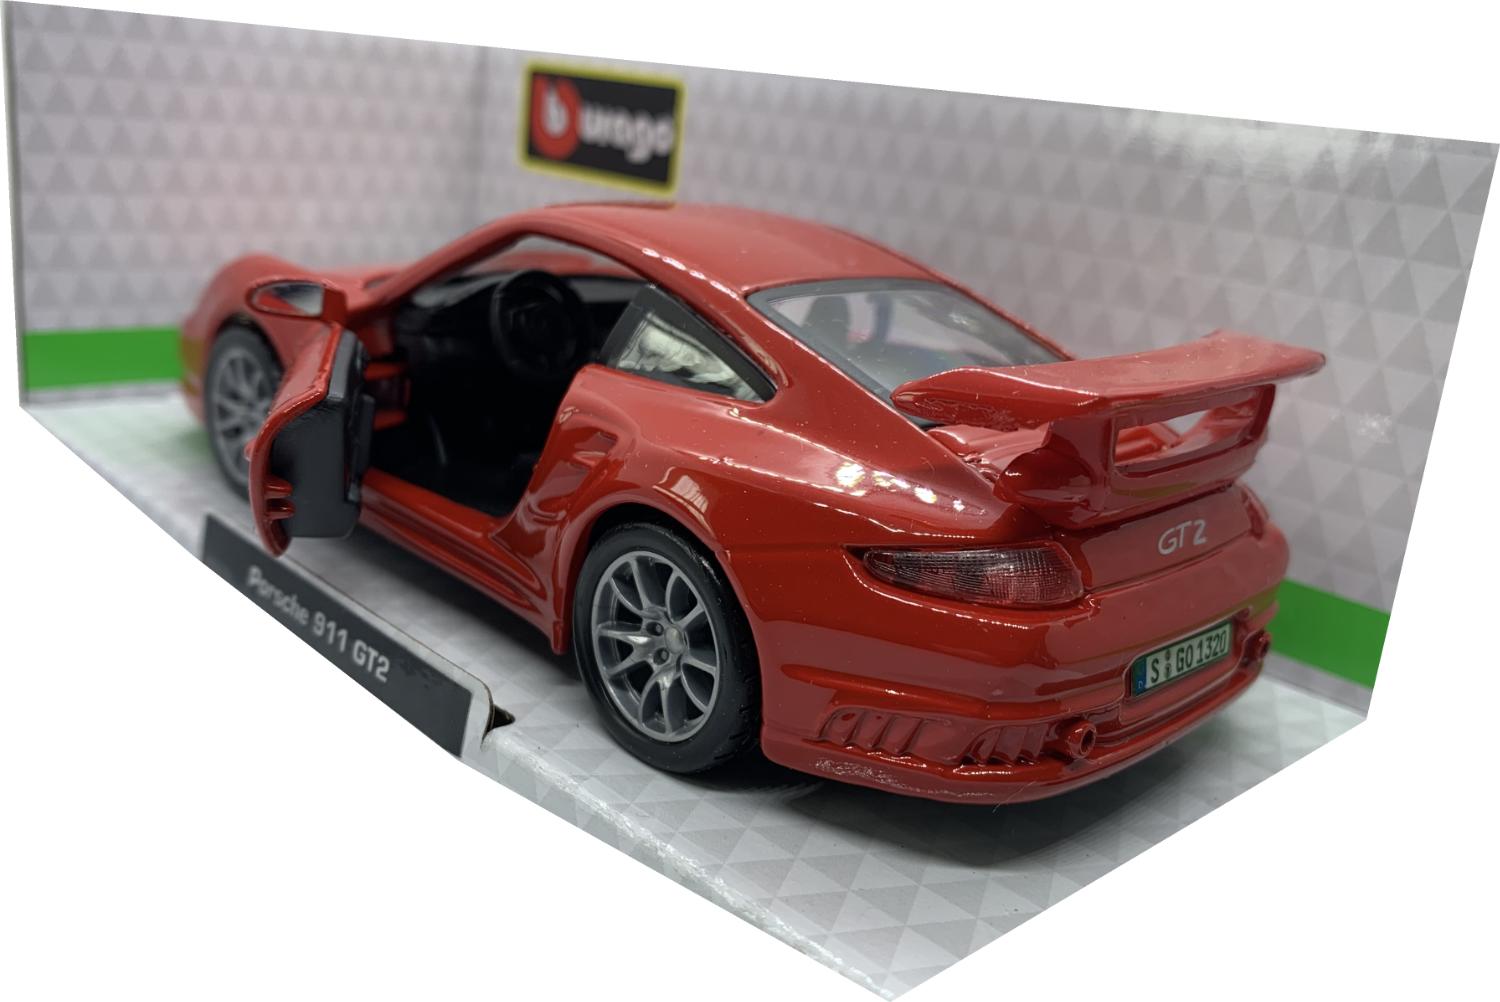 The Porsche 911 GT2 is decorated in red with high rear spoiler and silver wheels.  Other trims are finished in black and silver.  Features include opening driver and passenger door with working wheels